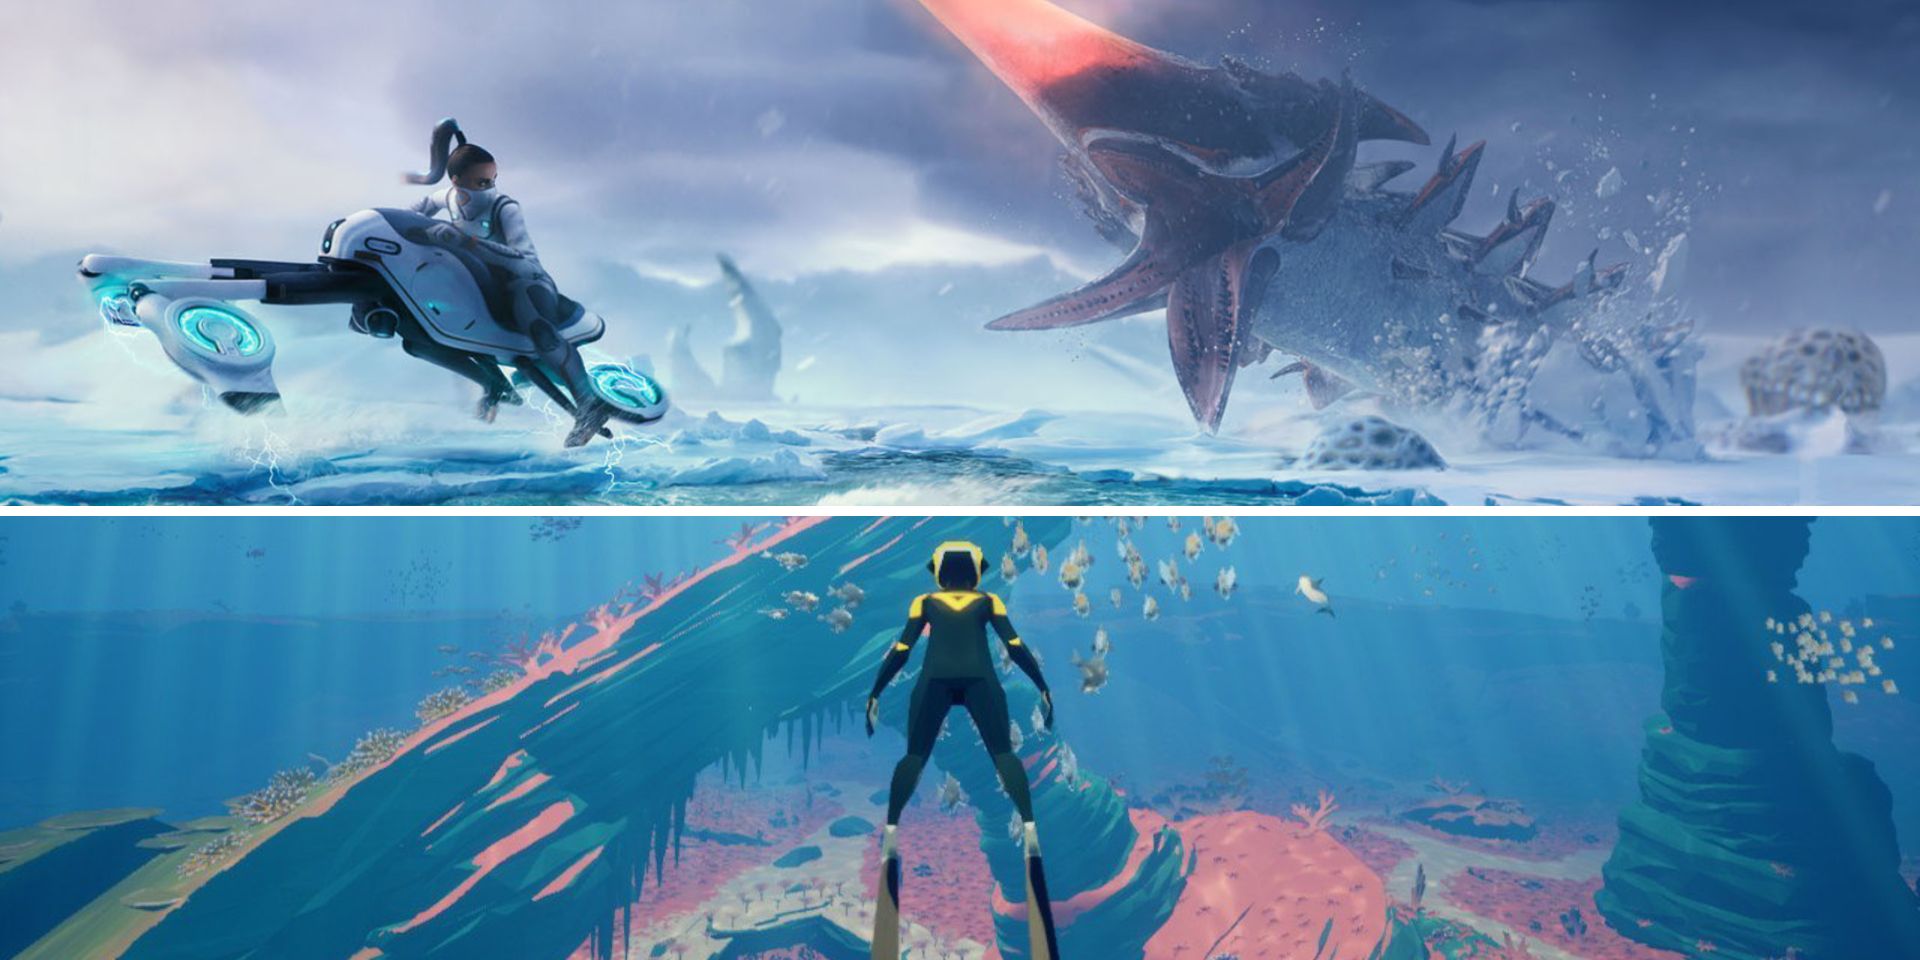 Best Exploration Games With Aquatic Settings